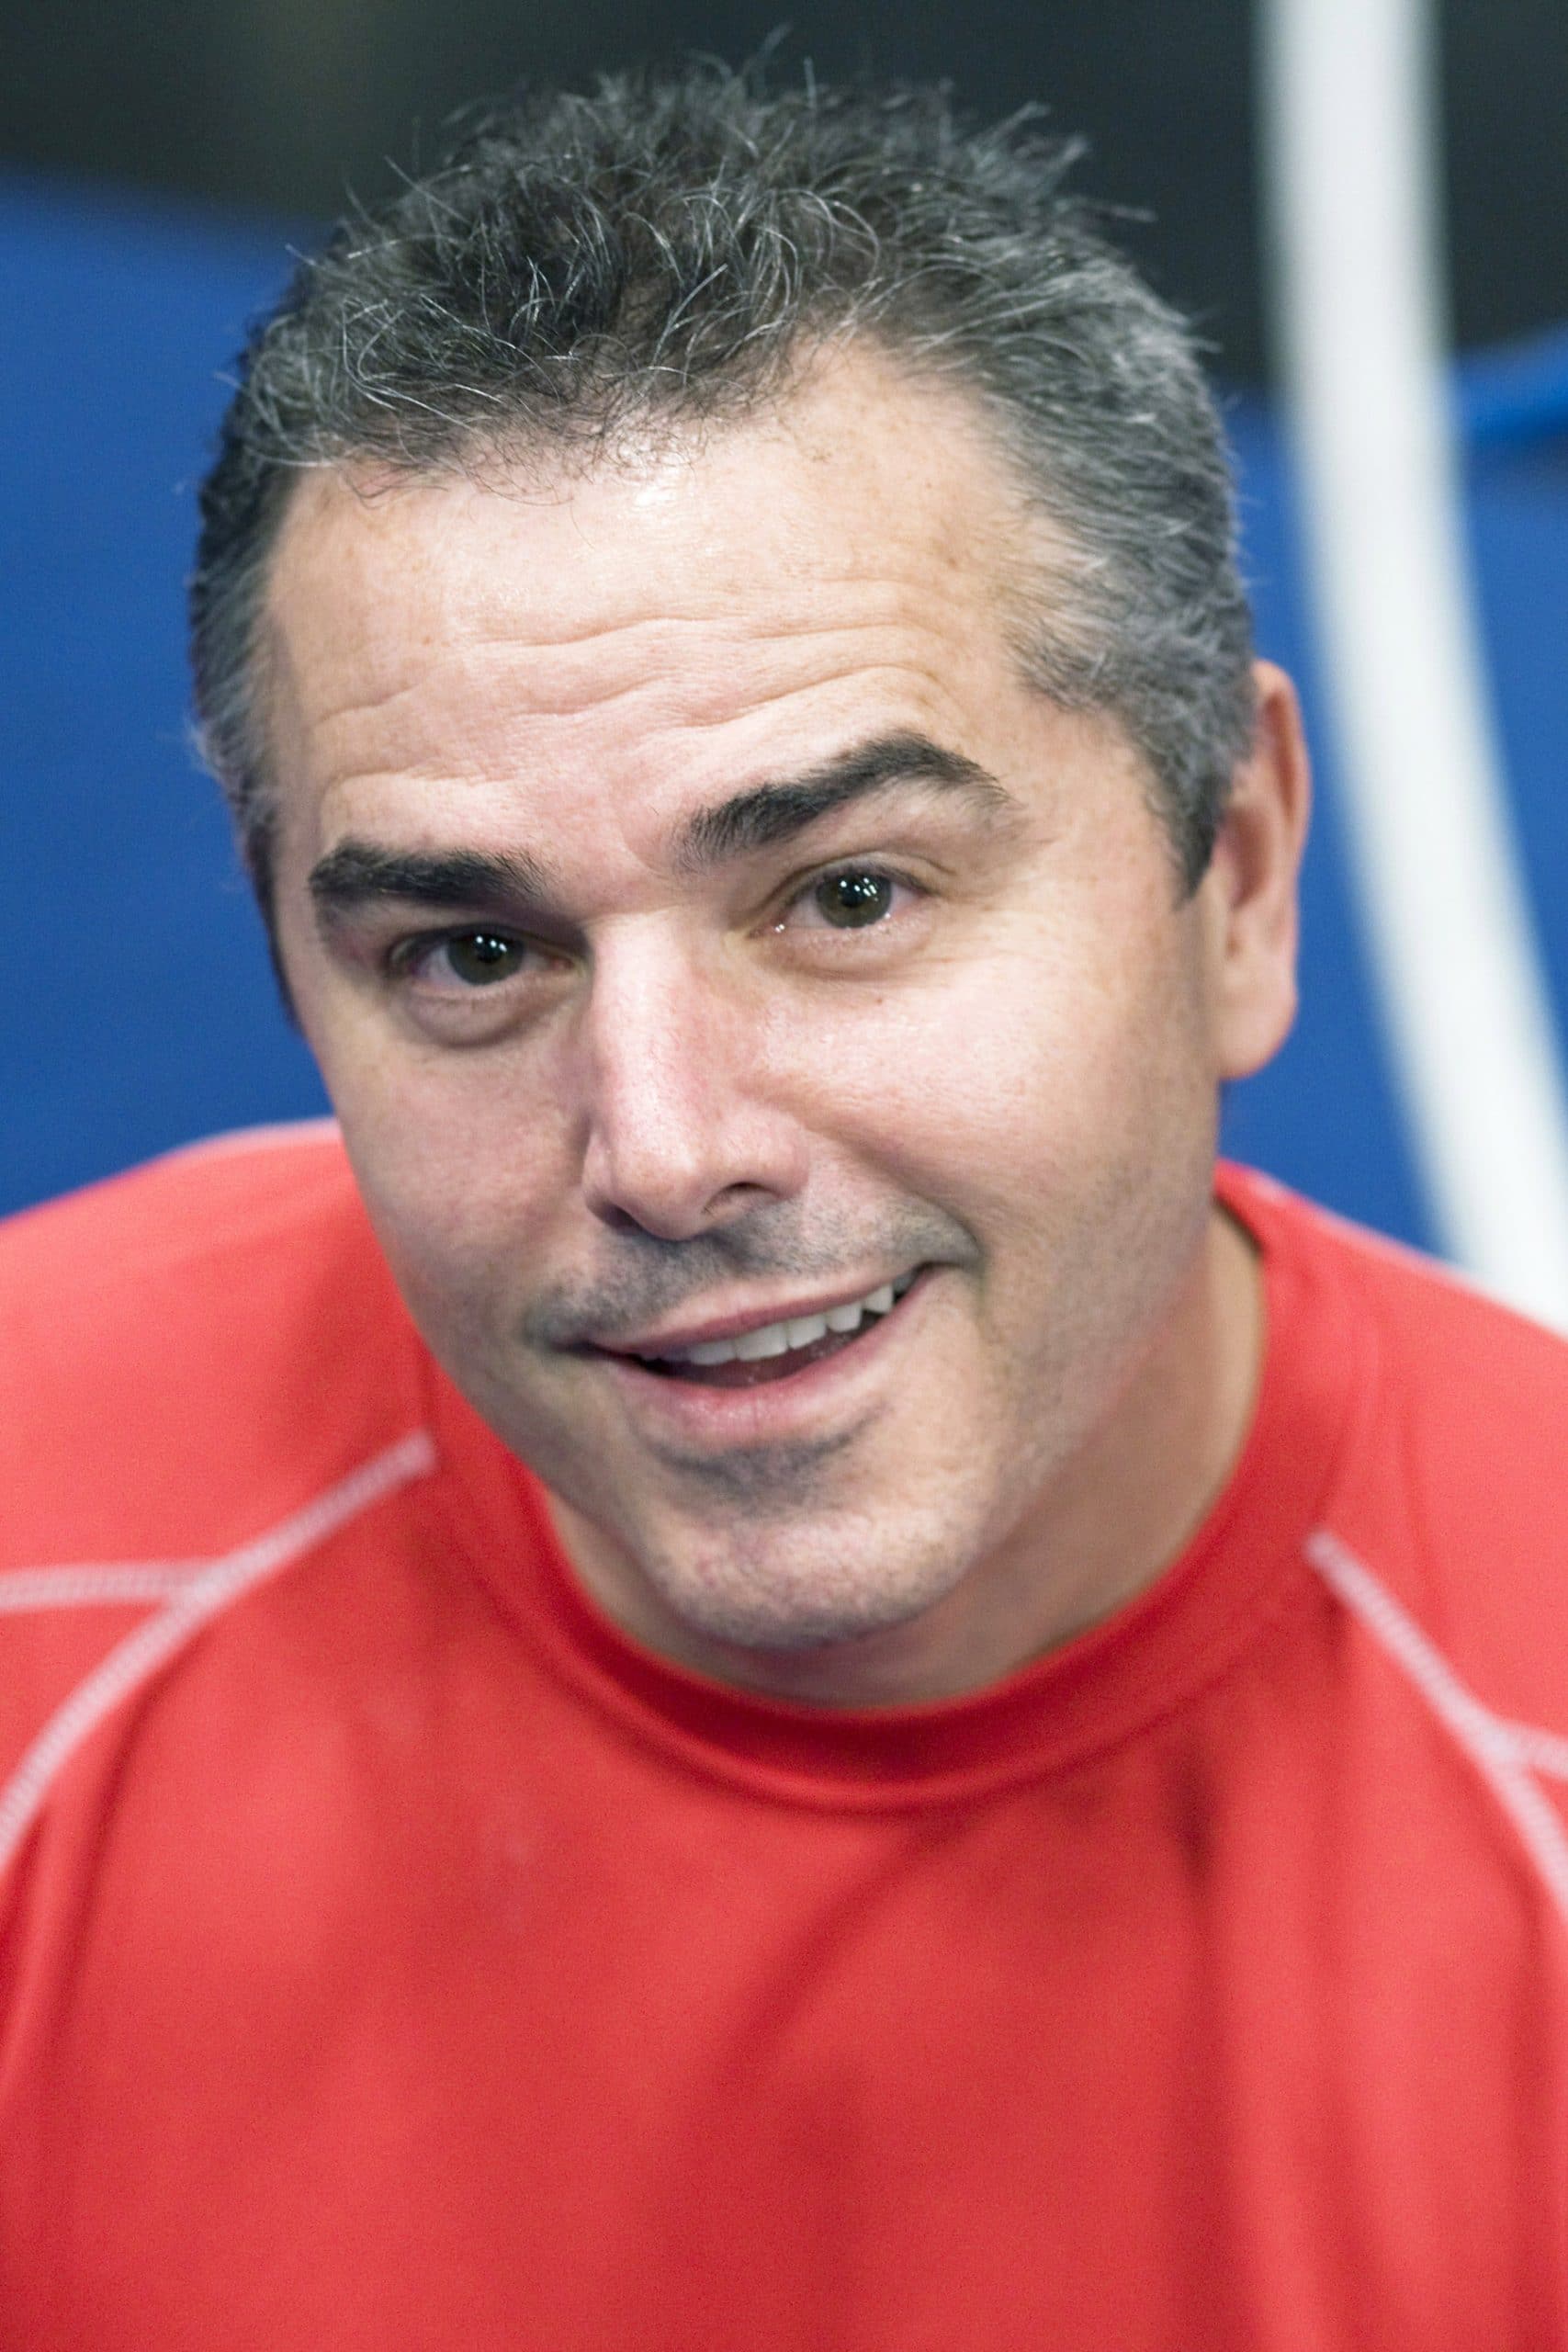 CELEBRITY CIRCUS, Christopher Knight, 'Day 4 of Circus Training', (Season 1), 2008